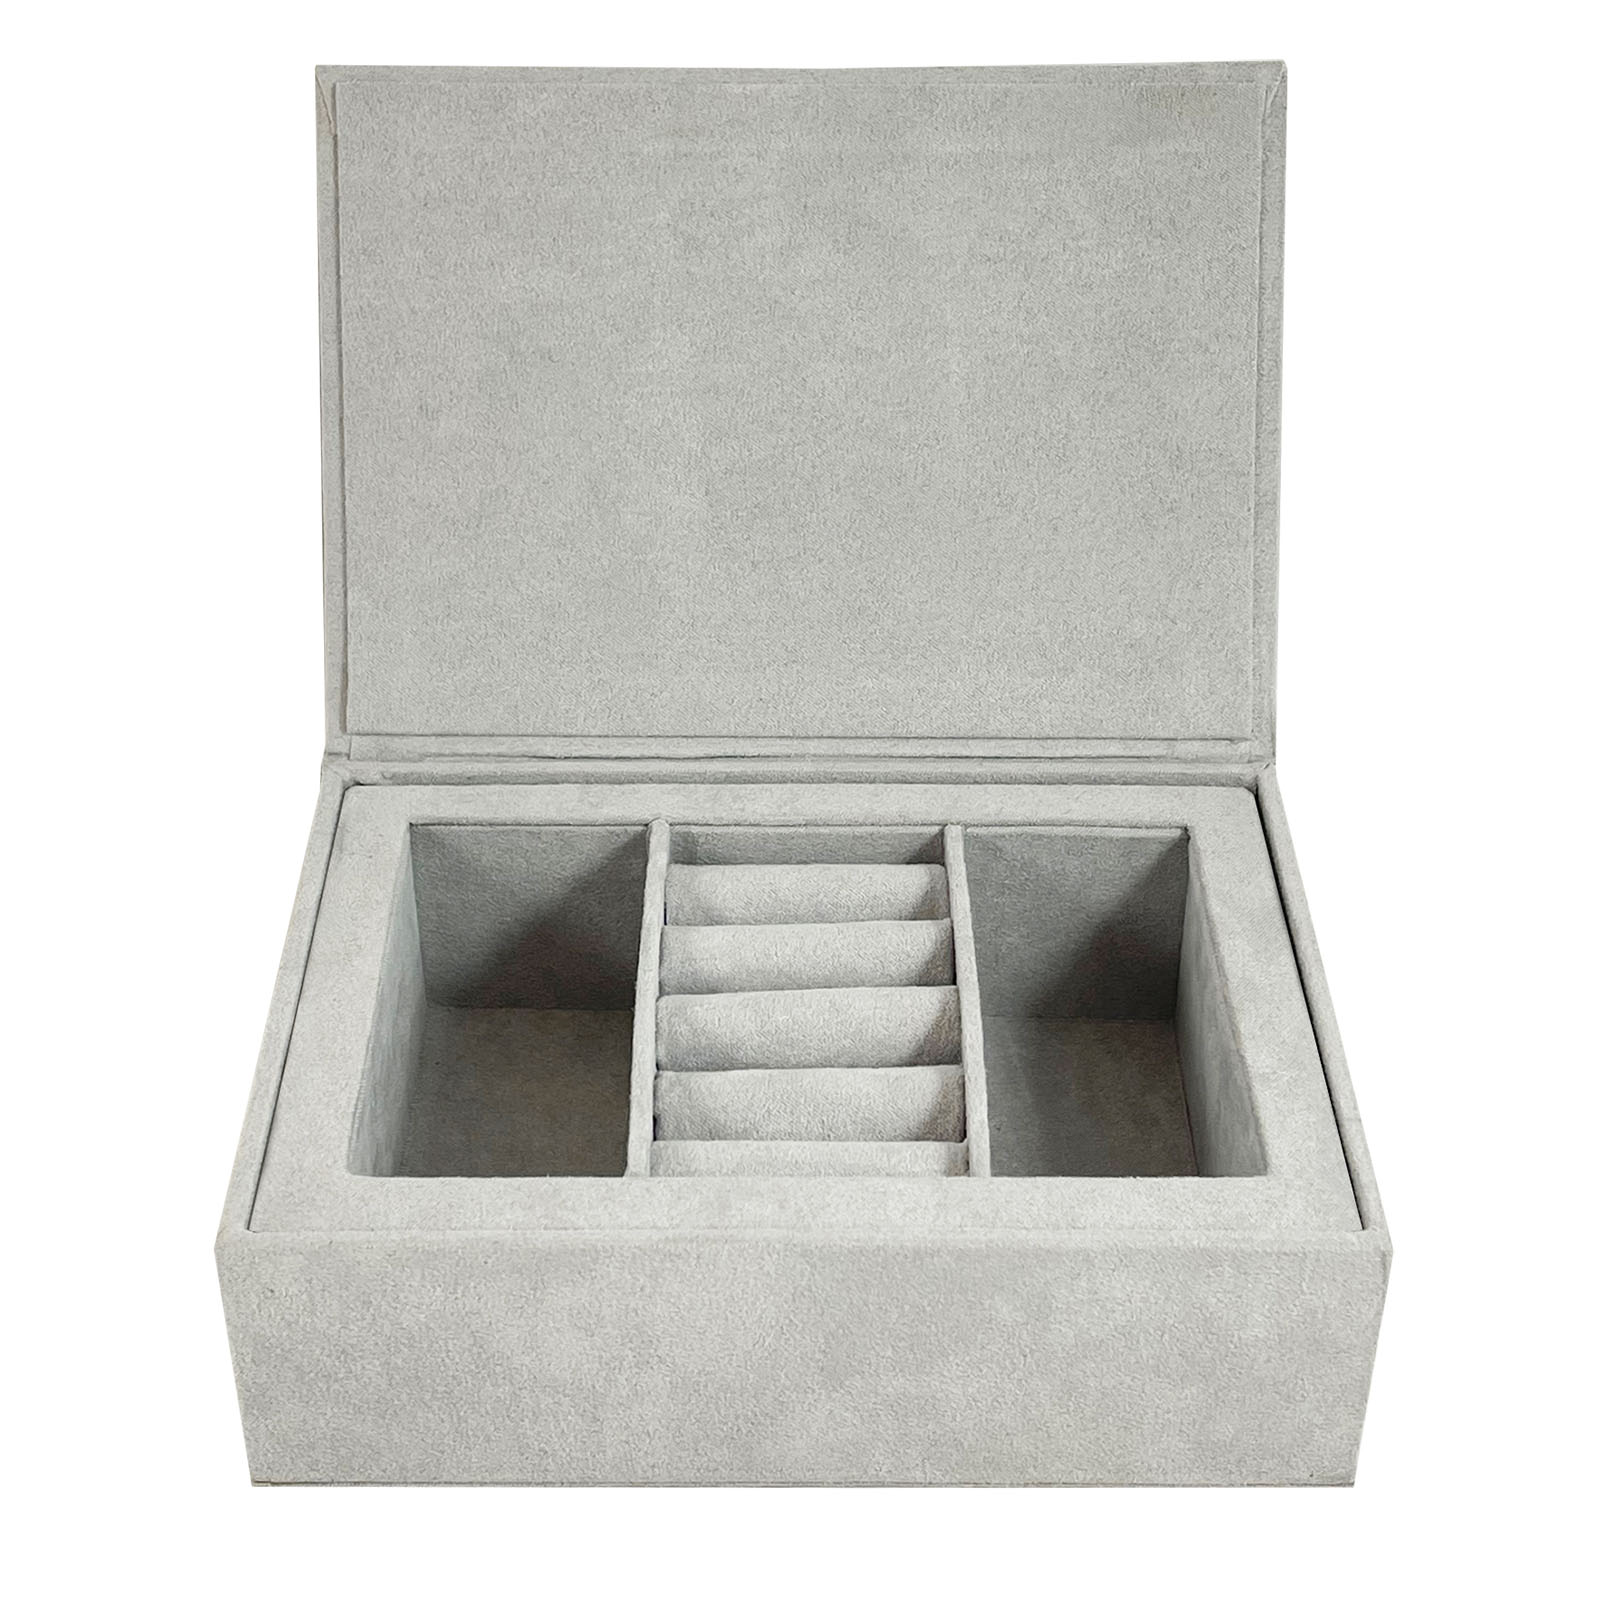 Suede Personalised Jewellery Box By Bloom Boutique | notonthehighstreet.com